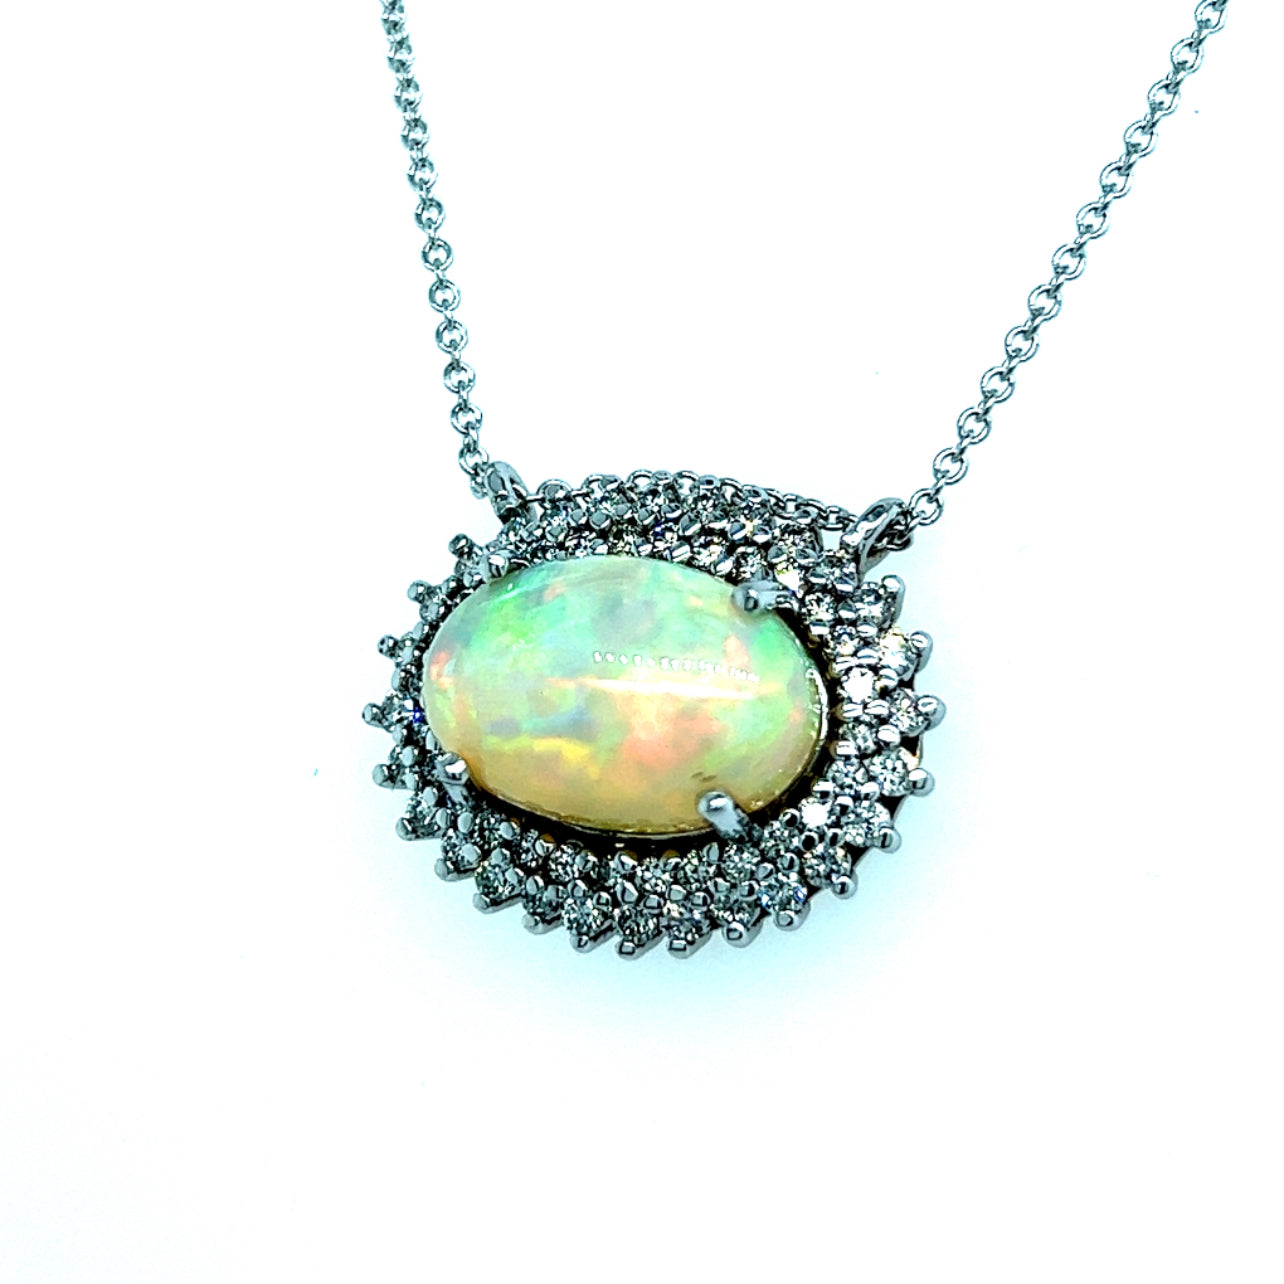 Natural Opal Diamond Pendant Necklace 18" 14k Gold 5.81 TCW Certified $5,950 301789